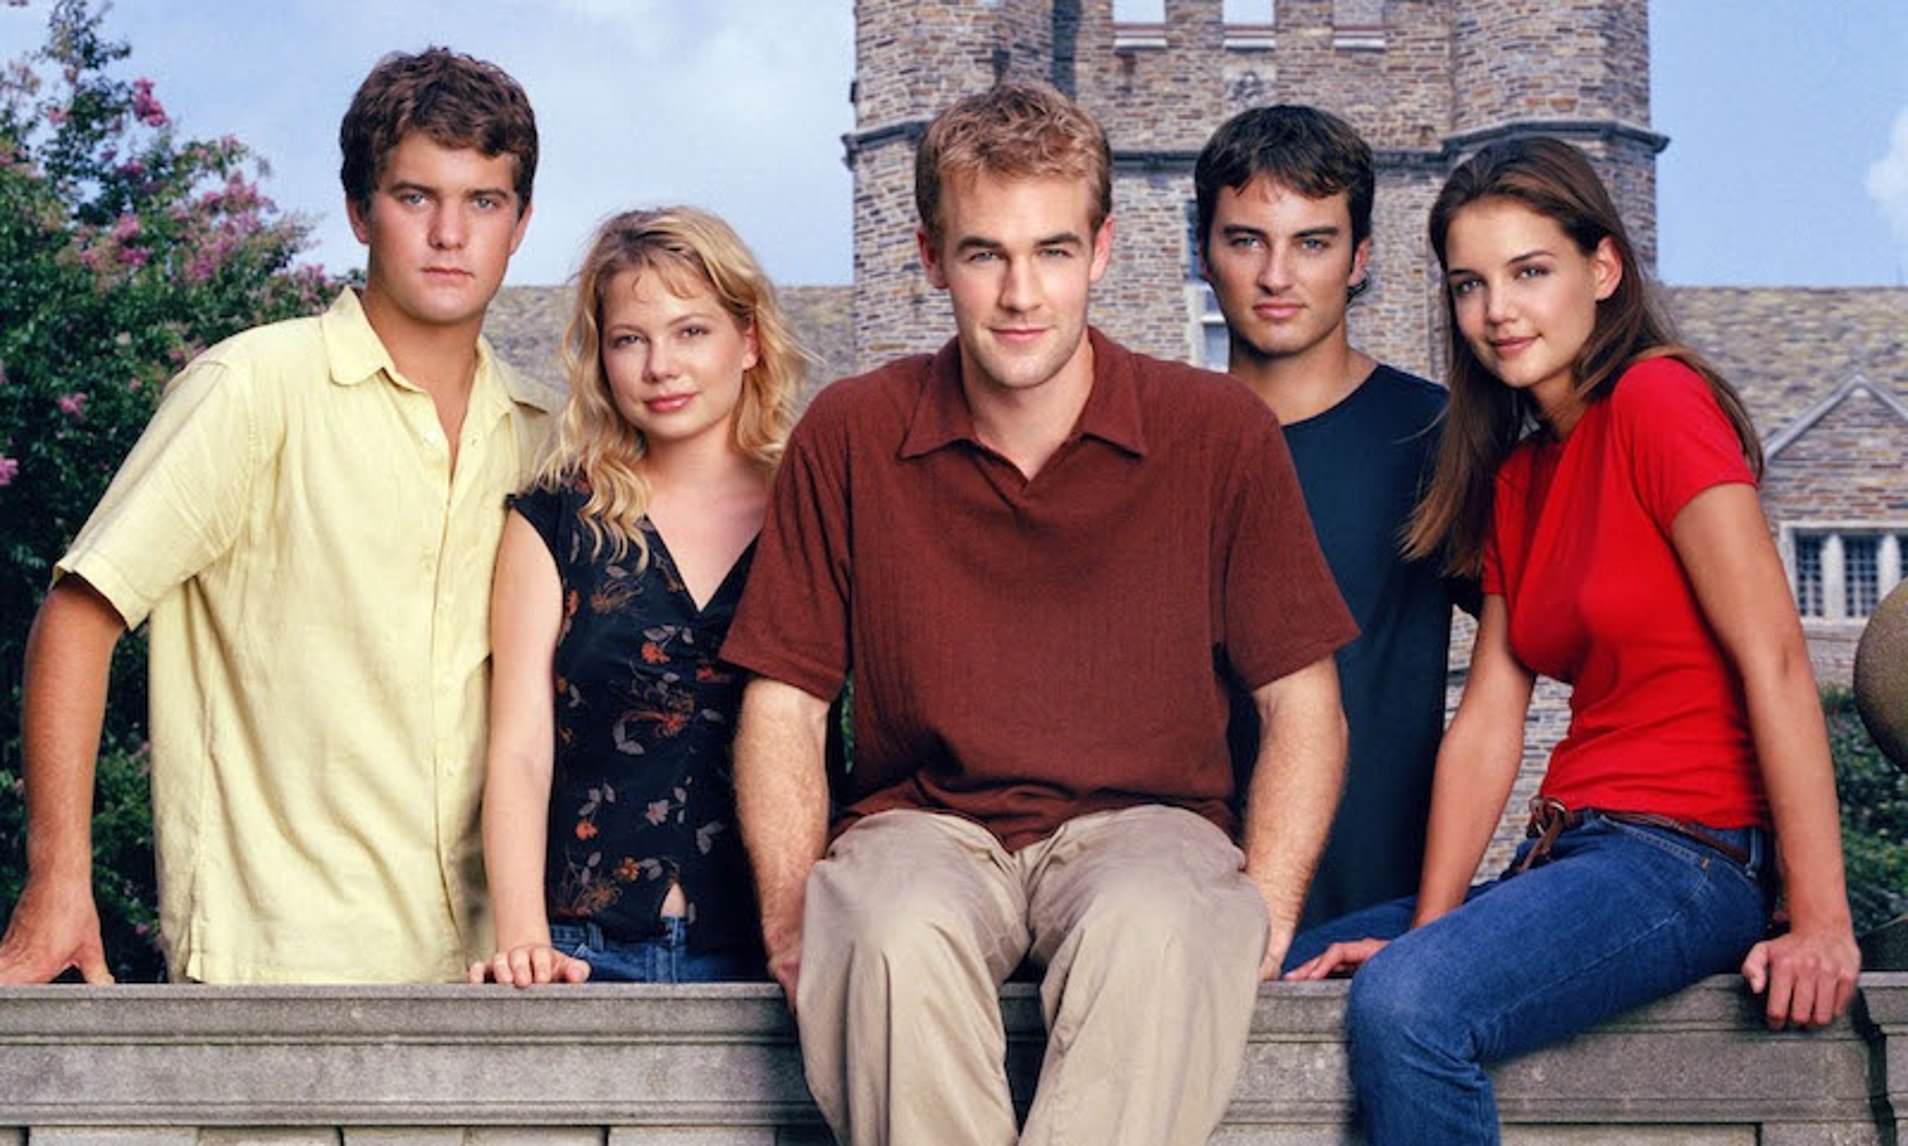 Dawson's Creek: Who Does Joey Potter End up With?